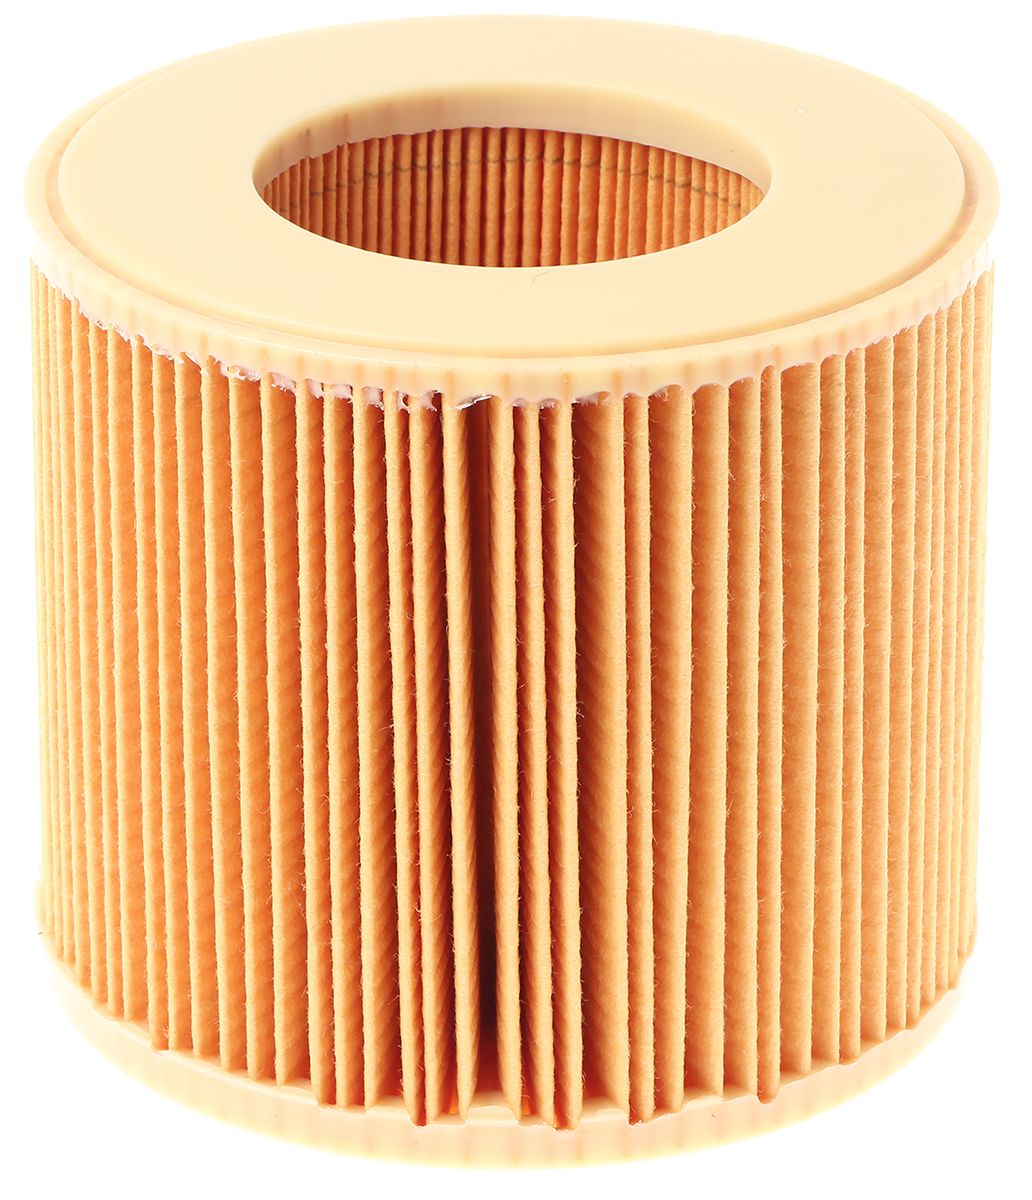 Karcher Vacuum Filter, For Use With NT 27/1 Vacuum Cleaner, NT 48/1 Vacuum Cleaner